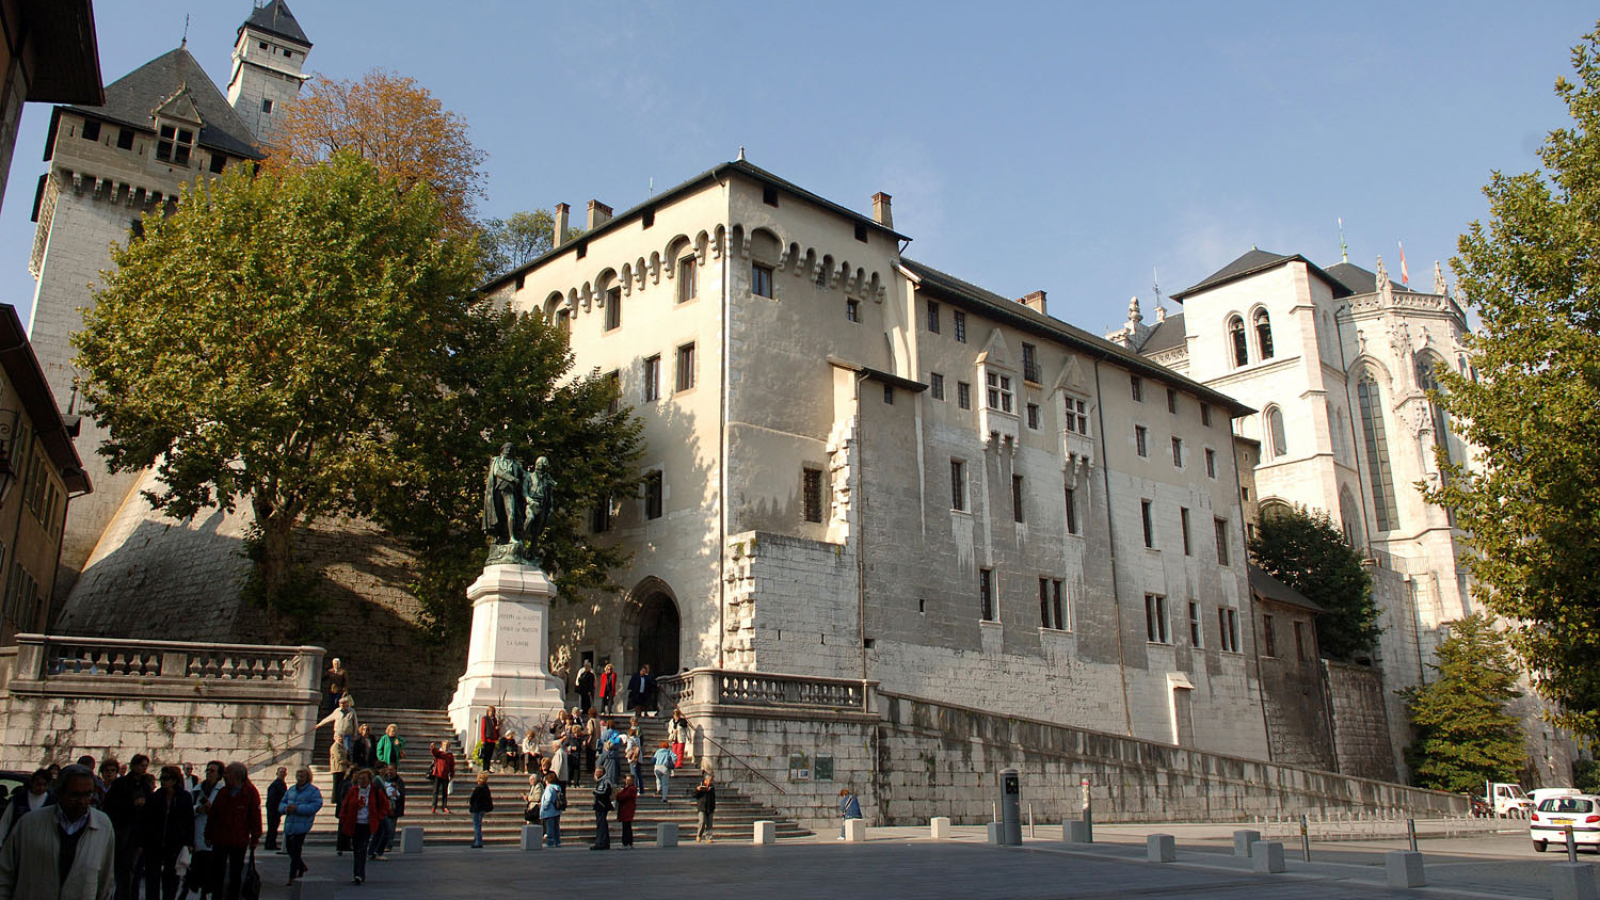 Castle of the Dukes of Savoy in Chambery